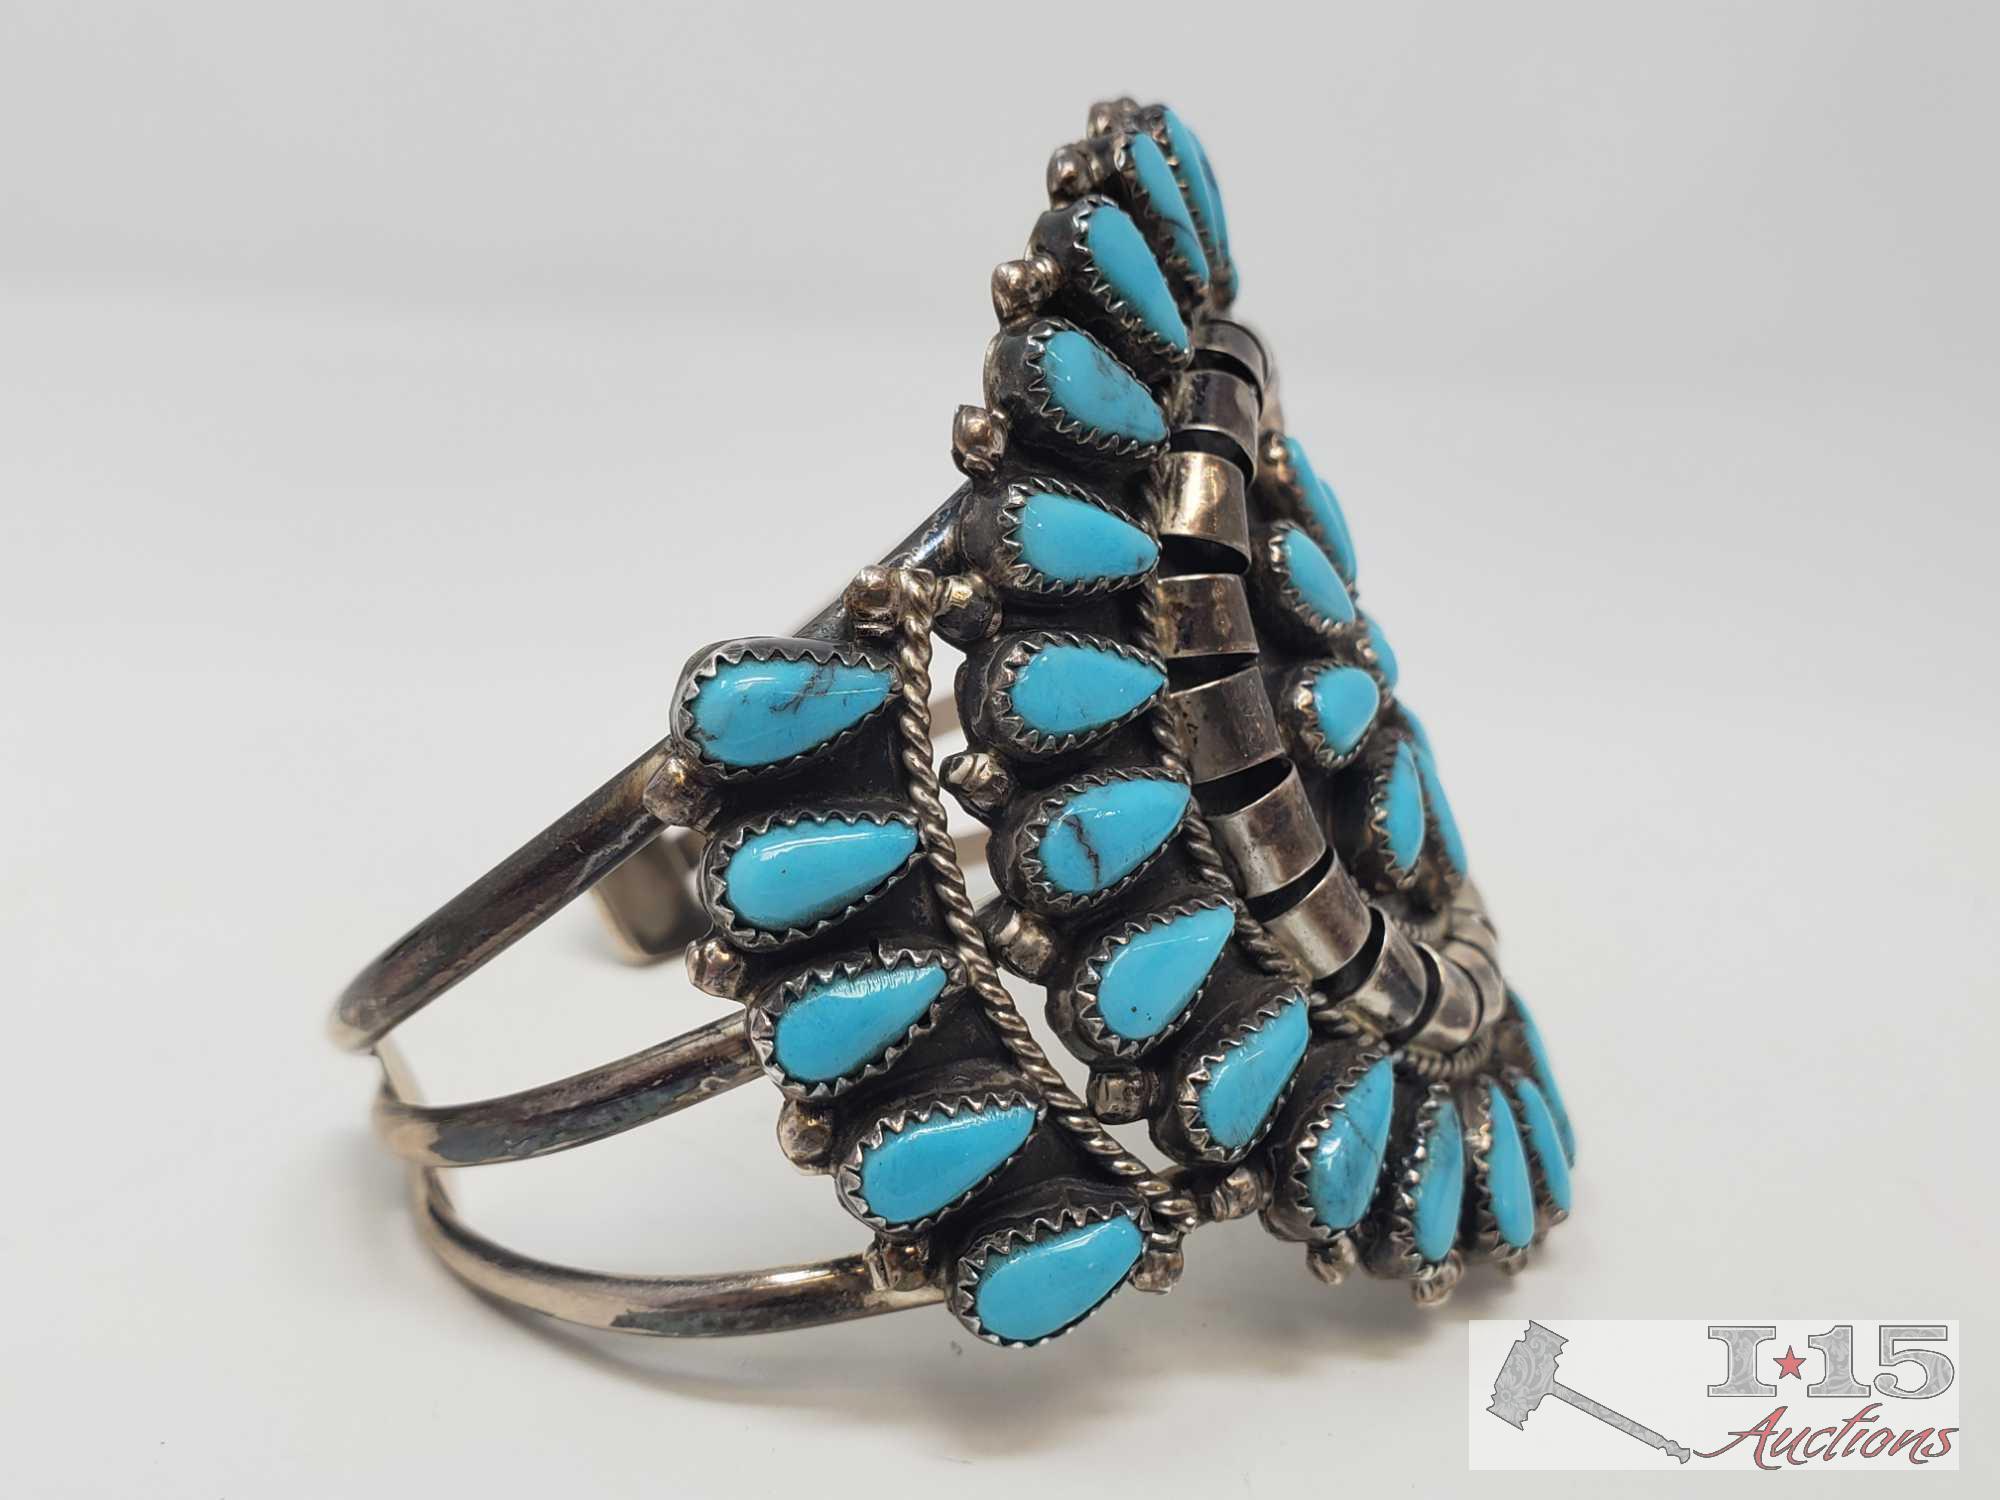 Unique Artist Marked Large Sterling Silver Cuff Bracelet Turquoise Stones